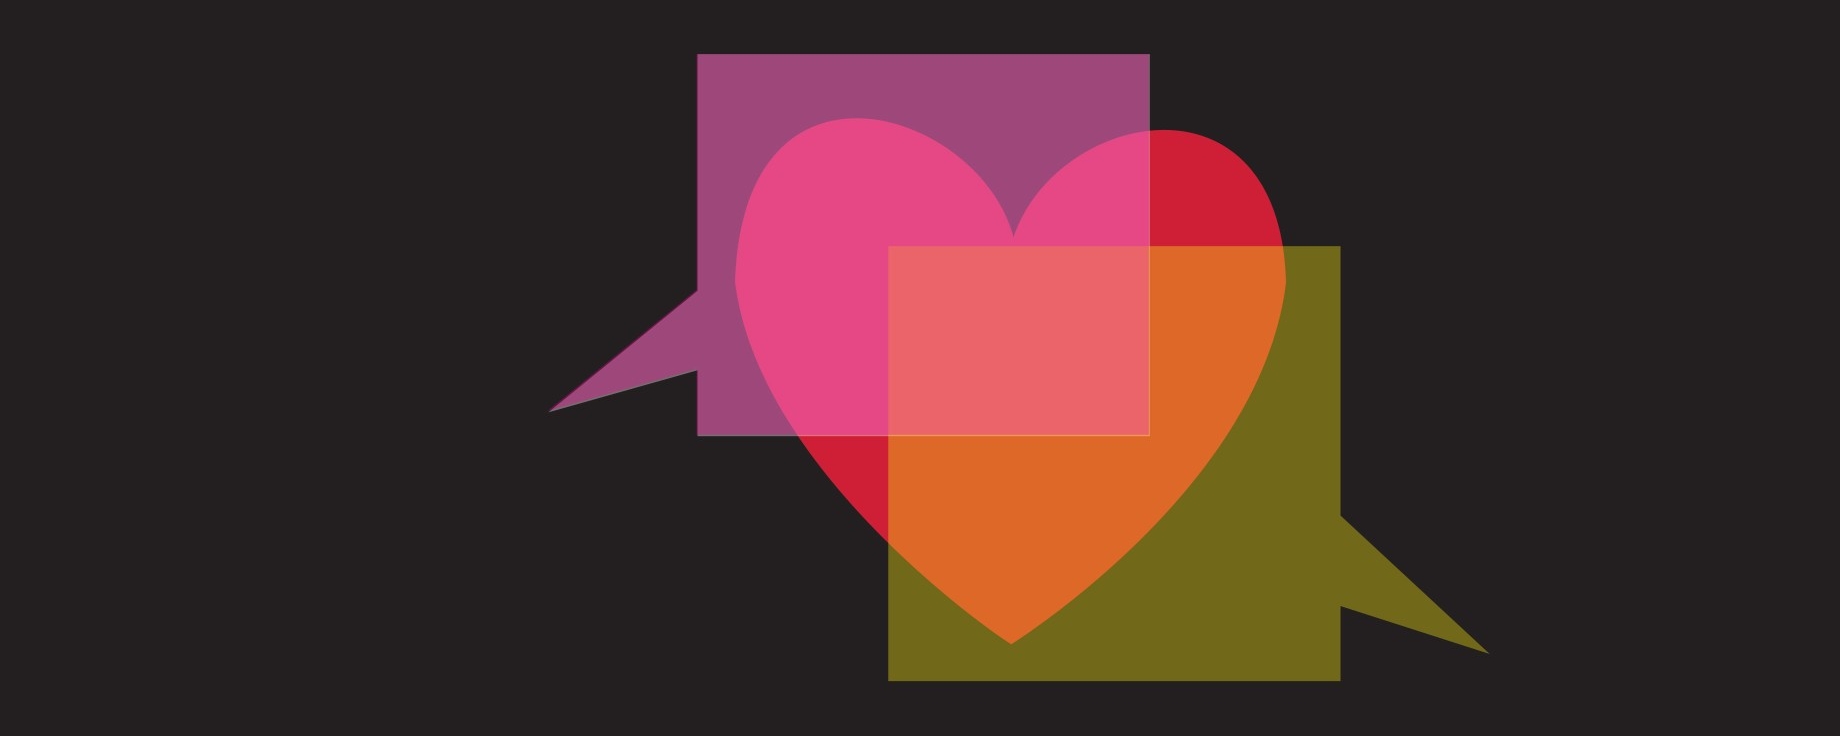 Heart overlayed with two square speech bubbles, one pink, one yellow, on a black background